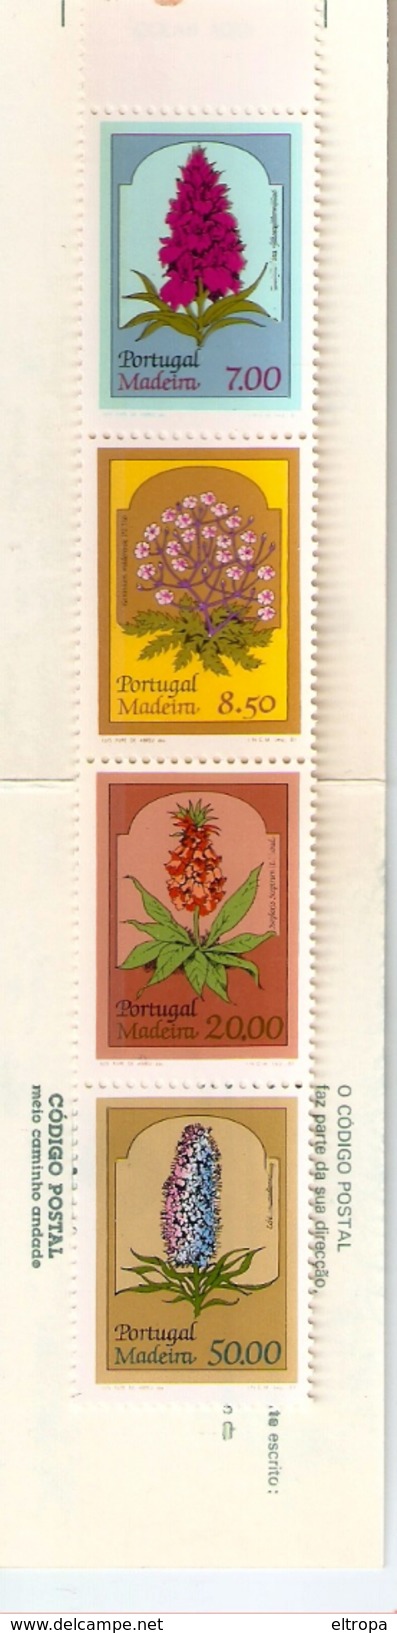 PORTUGAL 1981 Madeira Flowers Mint Complete Stamp Booklet - Booklets